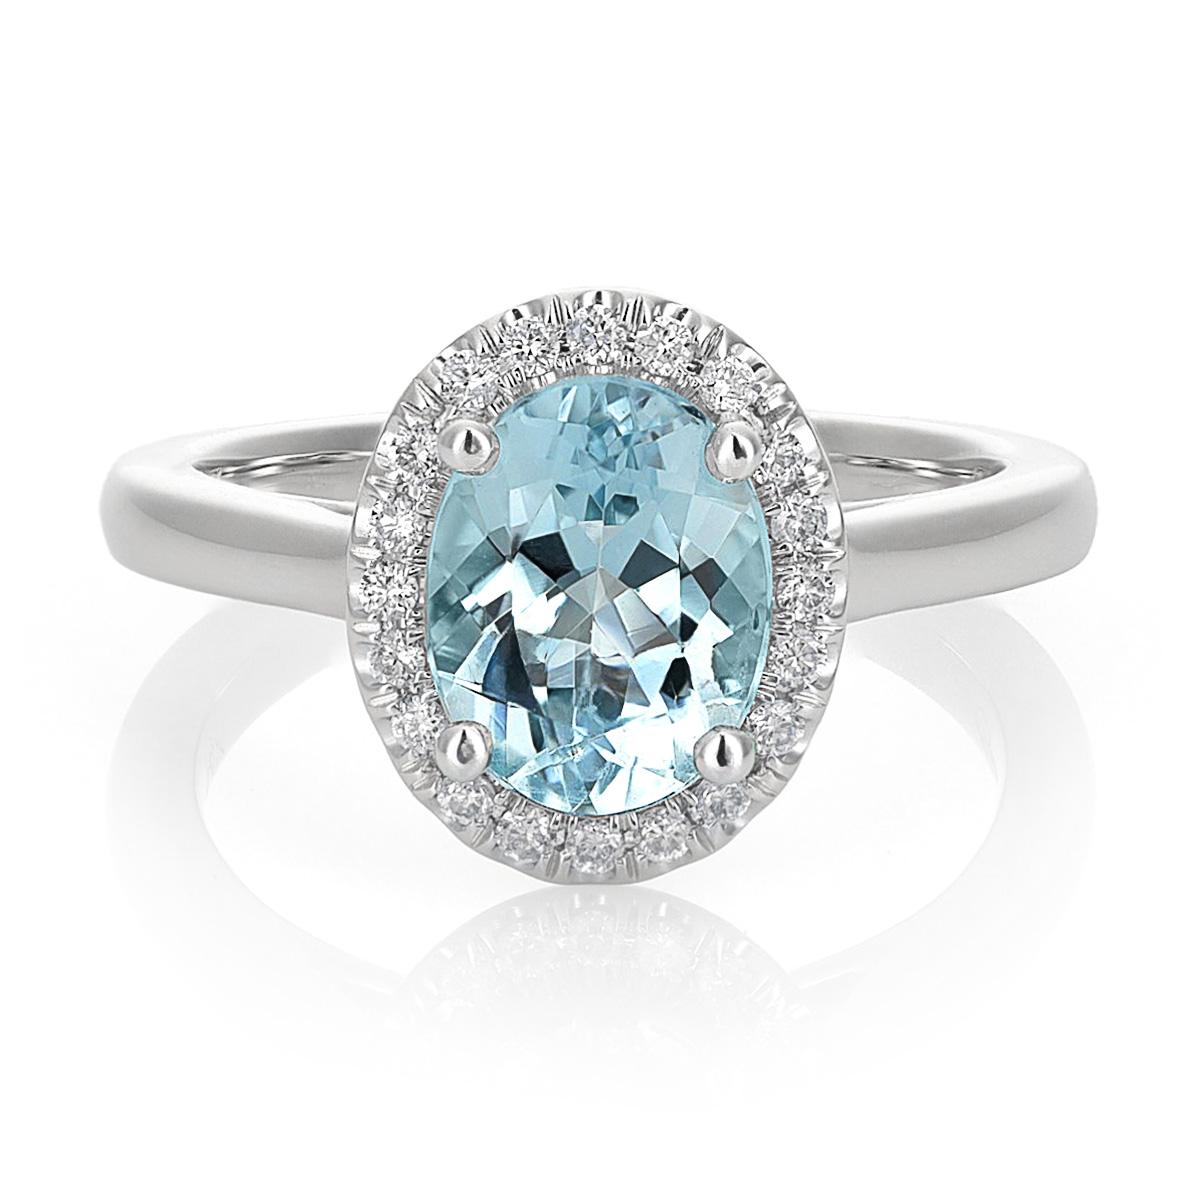 1.66 Carats Natural Aquamarine Diamonds set in 14K White Gold In New Condition For Sale In Los Angeles, CA